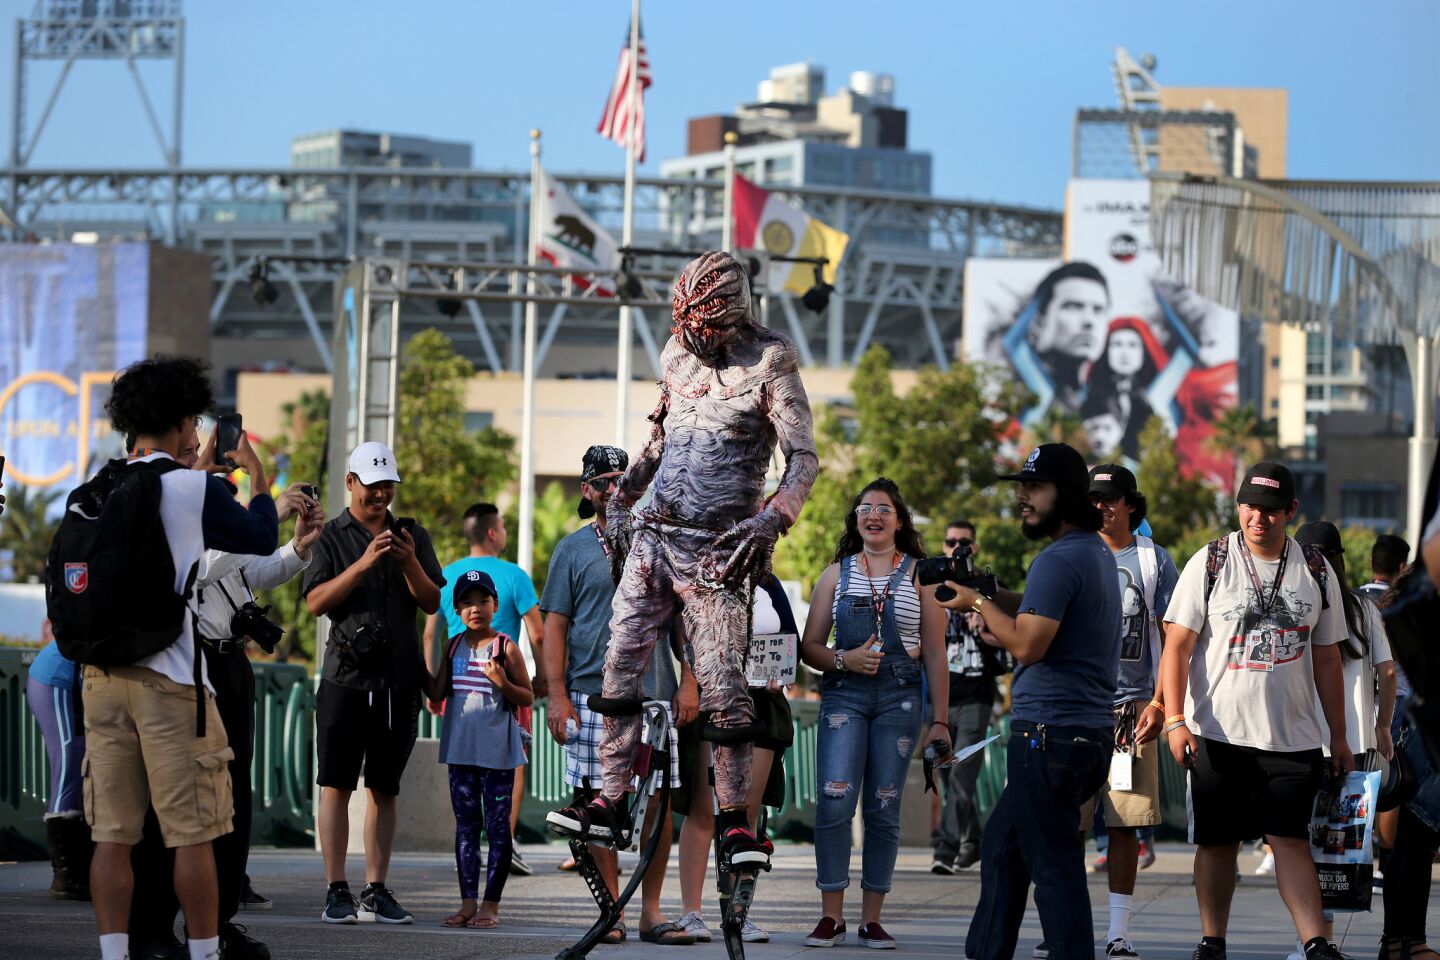 A costumed character on stilts walks around the San Diego Convention Center on opening day of Comic-Con International.